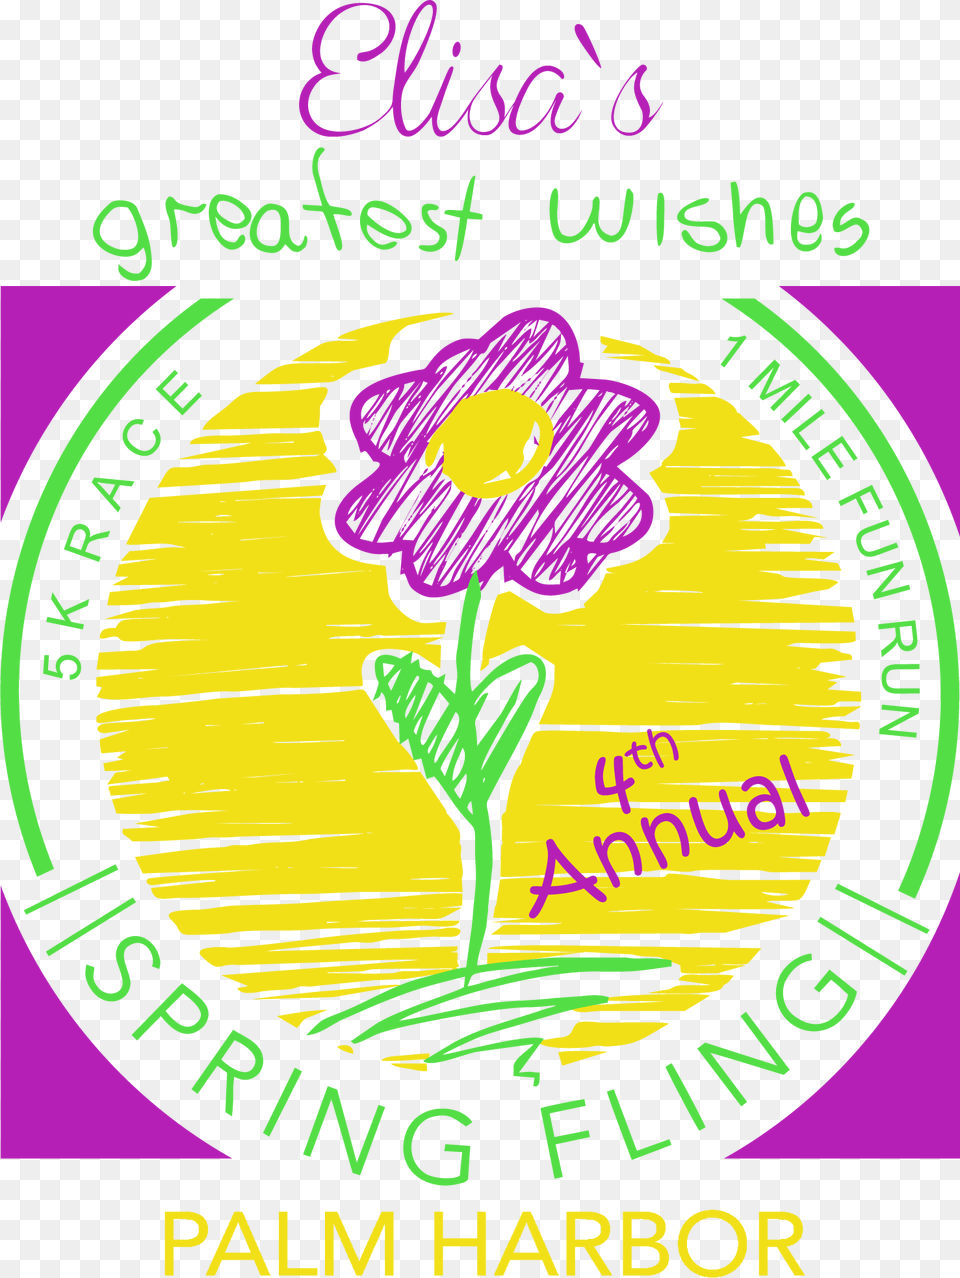 Palm Harbor Spring Fling 5k Race And 1 Mile Fun Run Wise Animals By Majede Motalebi, Purple, Envelope, Greeting Card, Mail Png